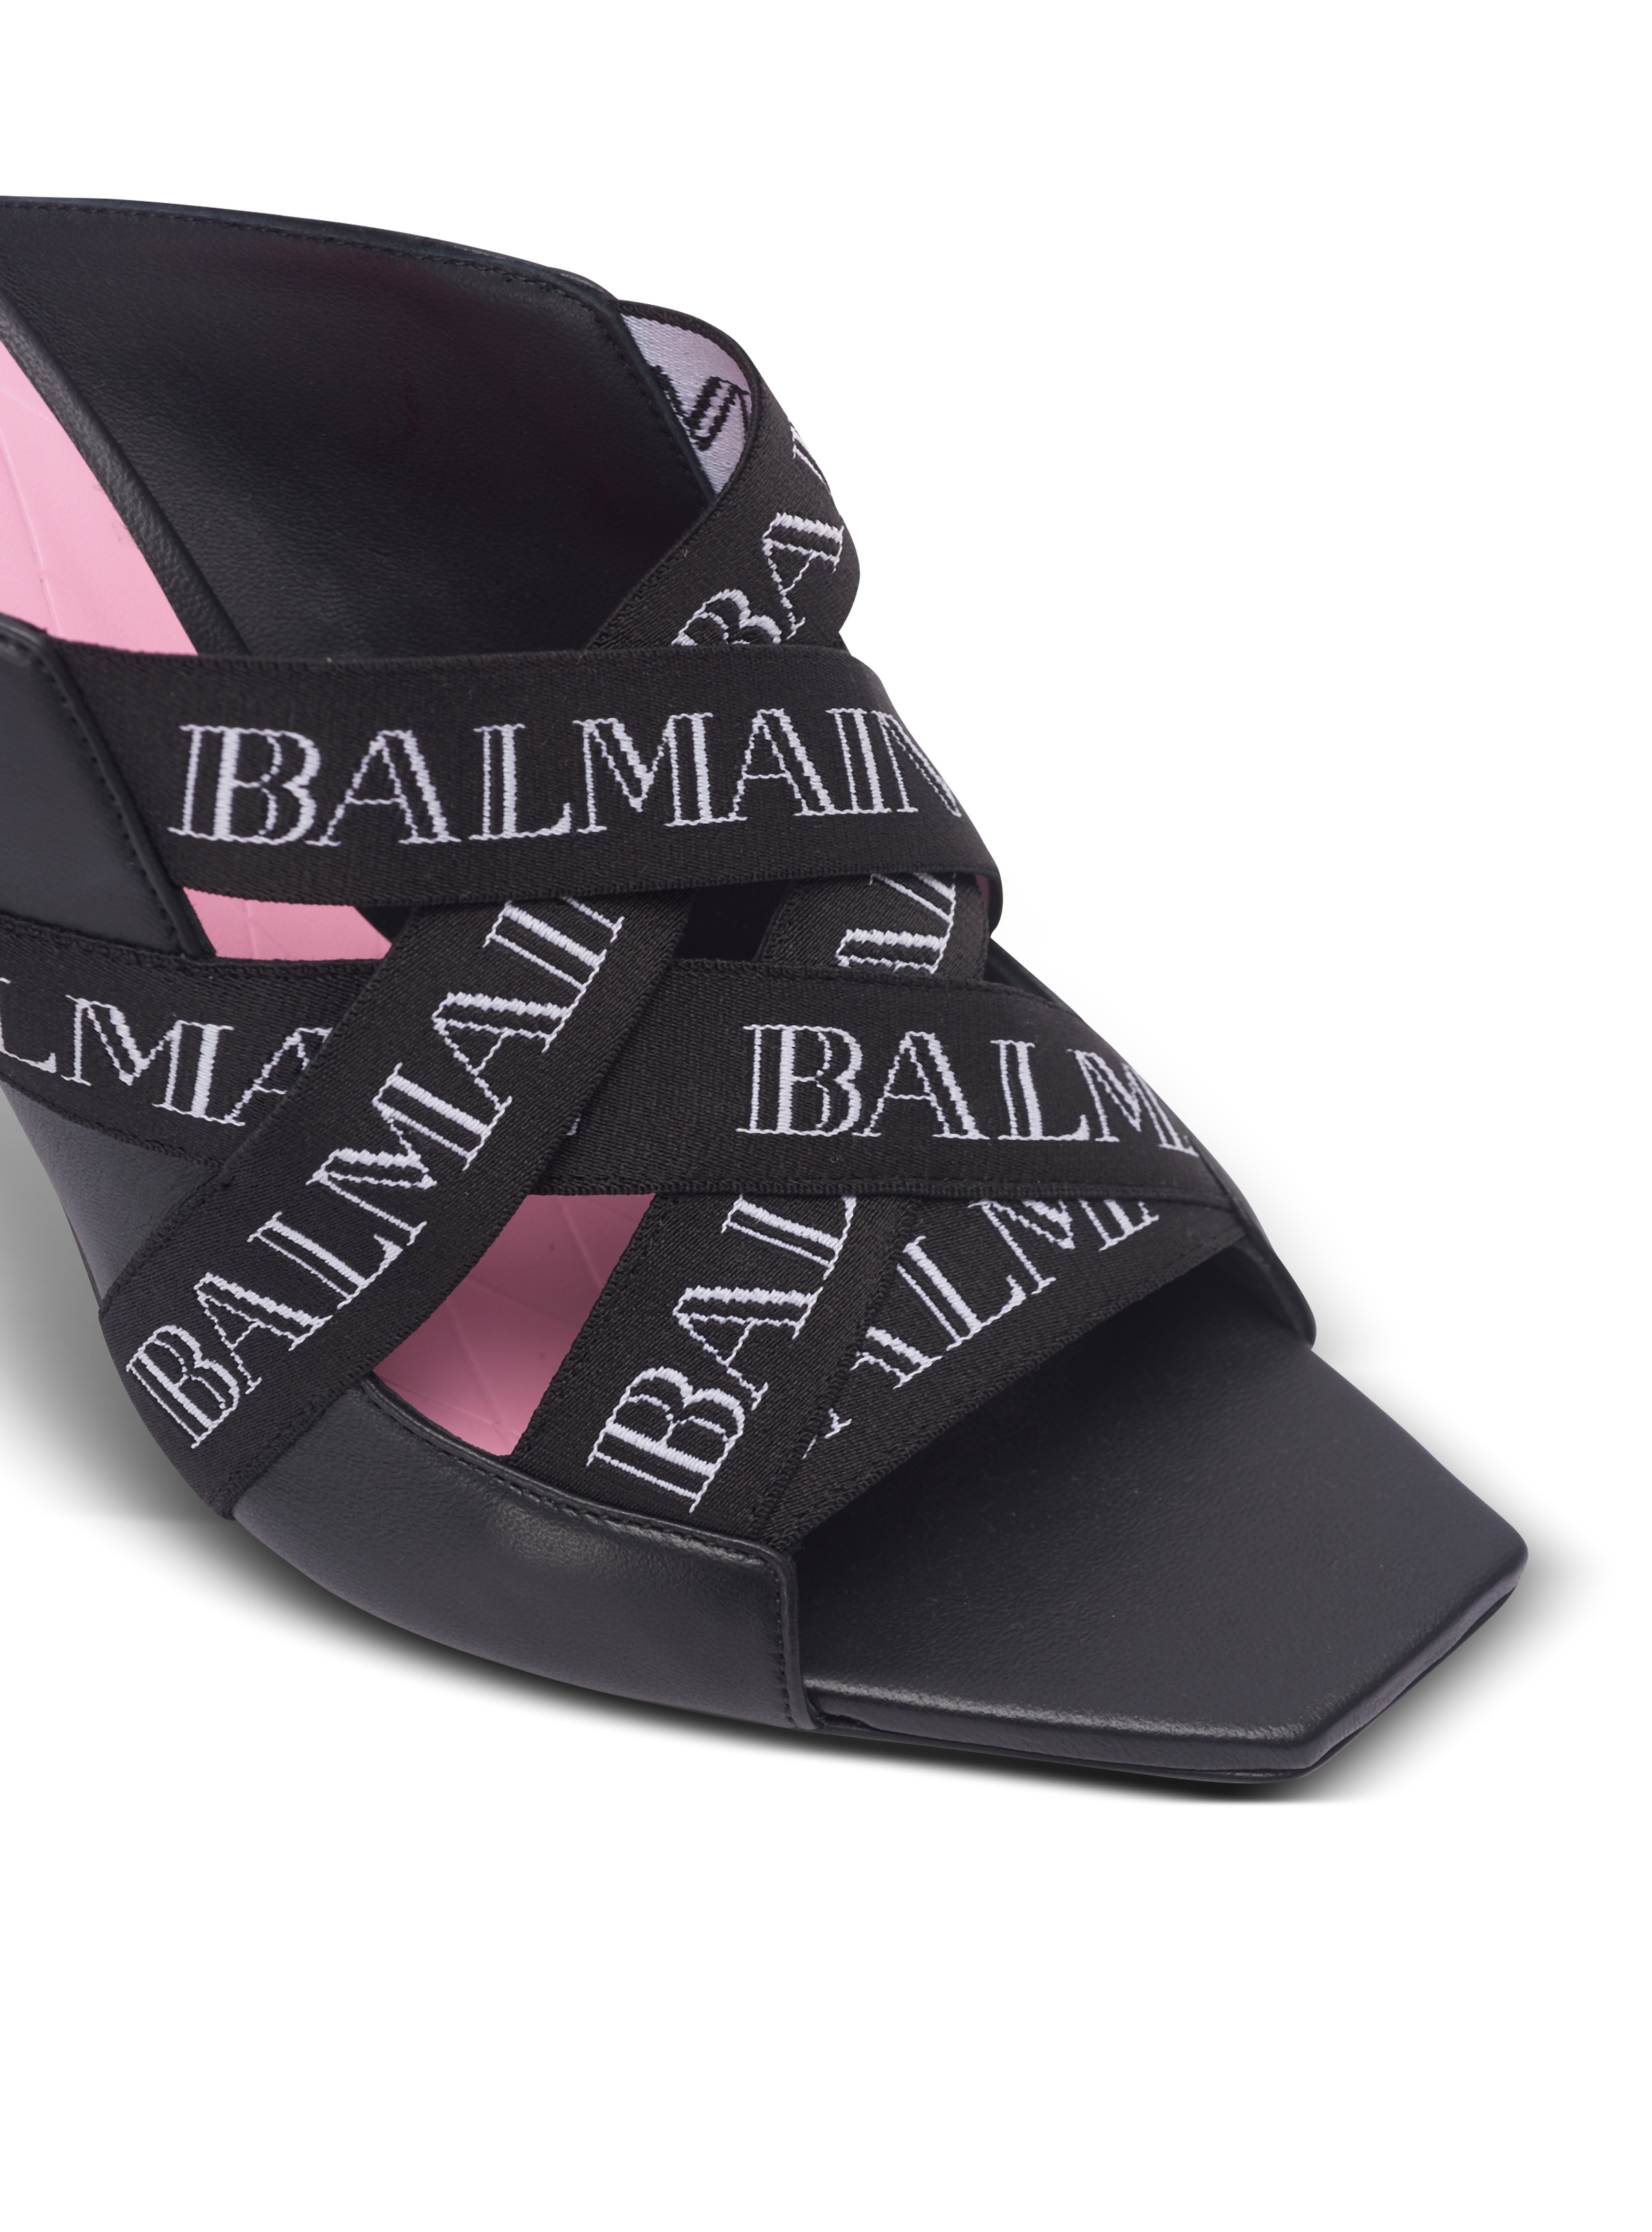 Ruby mules with Vintage Balmain straps - 7